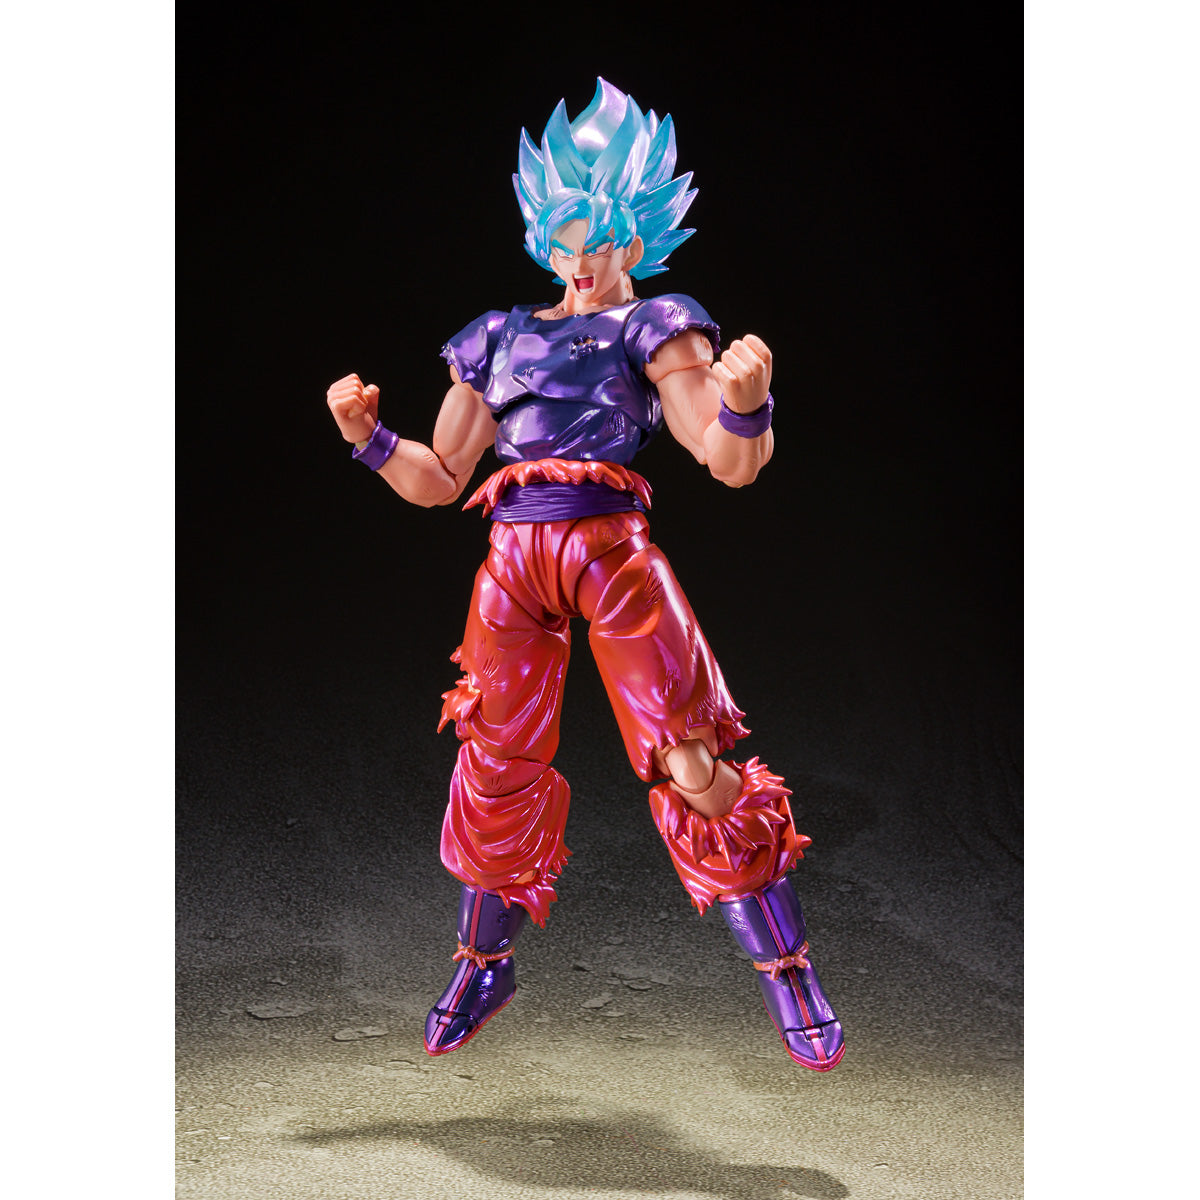 Demoniacal Fit Dragon Ball Super Counterattacking K (Whis Gi Son Goku)  Action Figure Review 